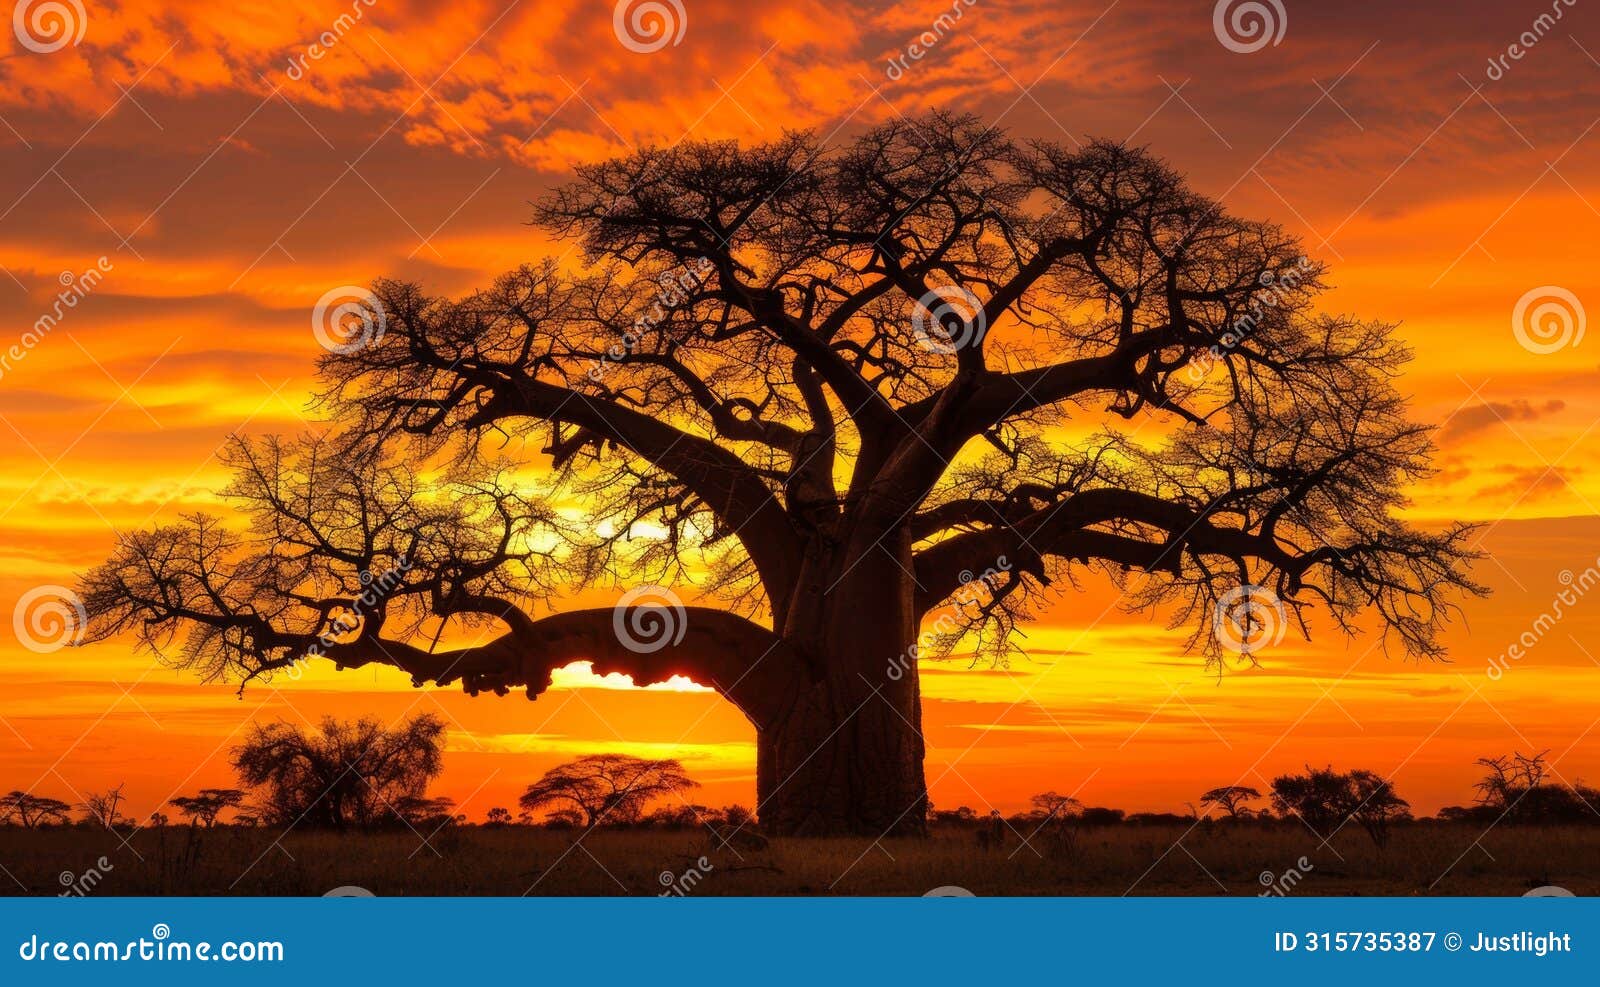 the distant silhouette of a majestic baobab tree against the vibrant orange sky serves as the perfect backdrop for a